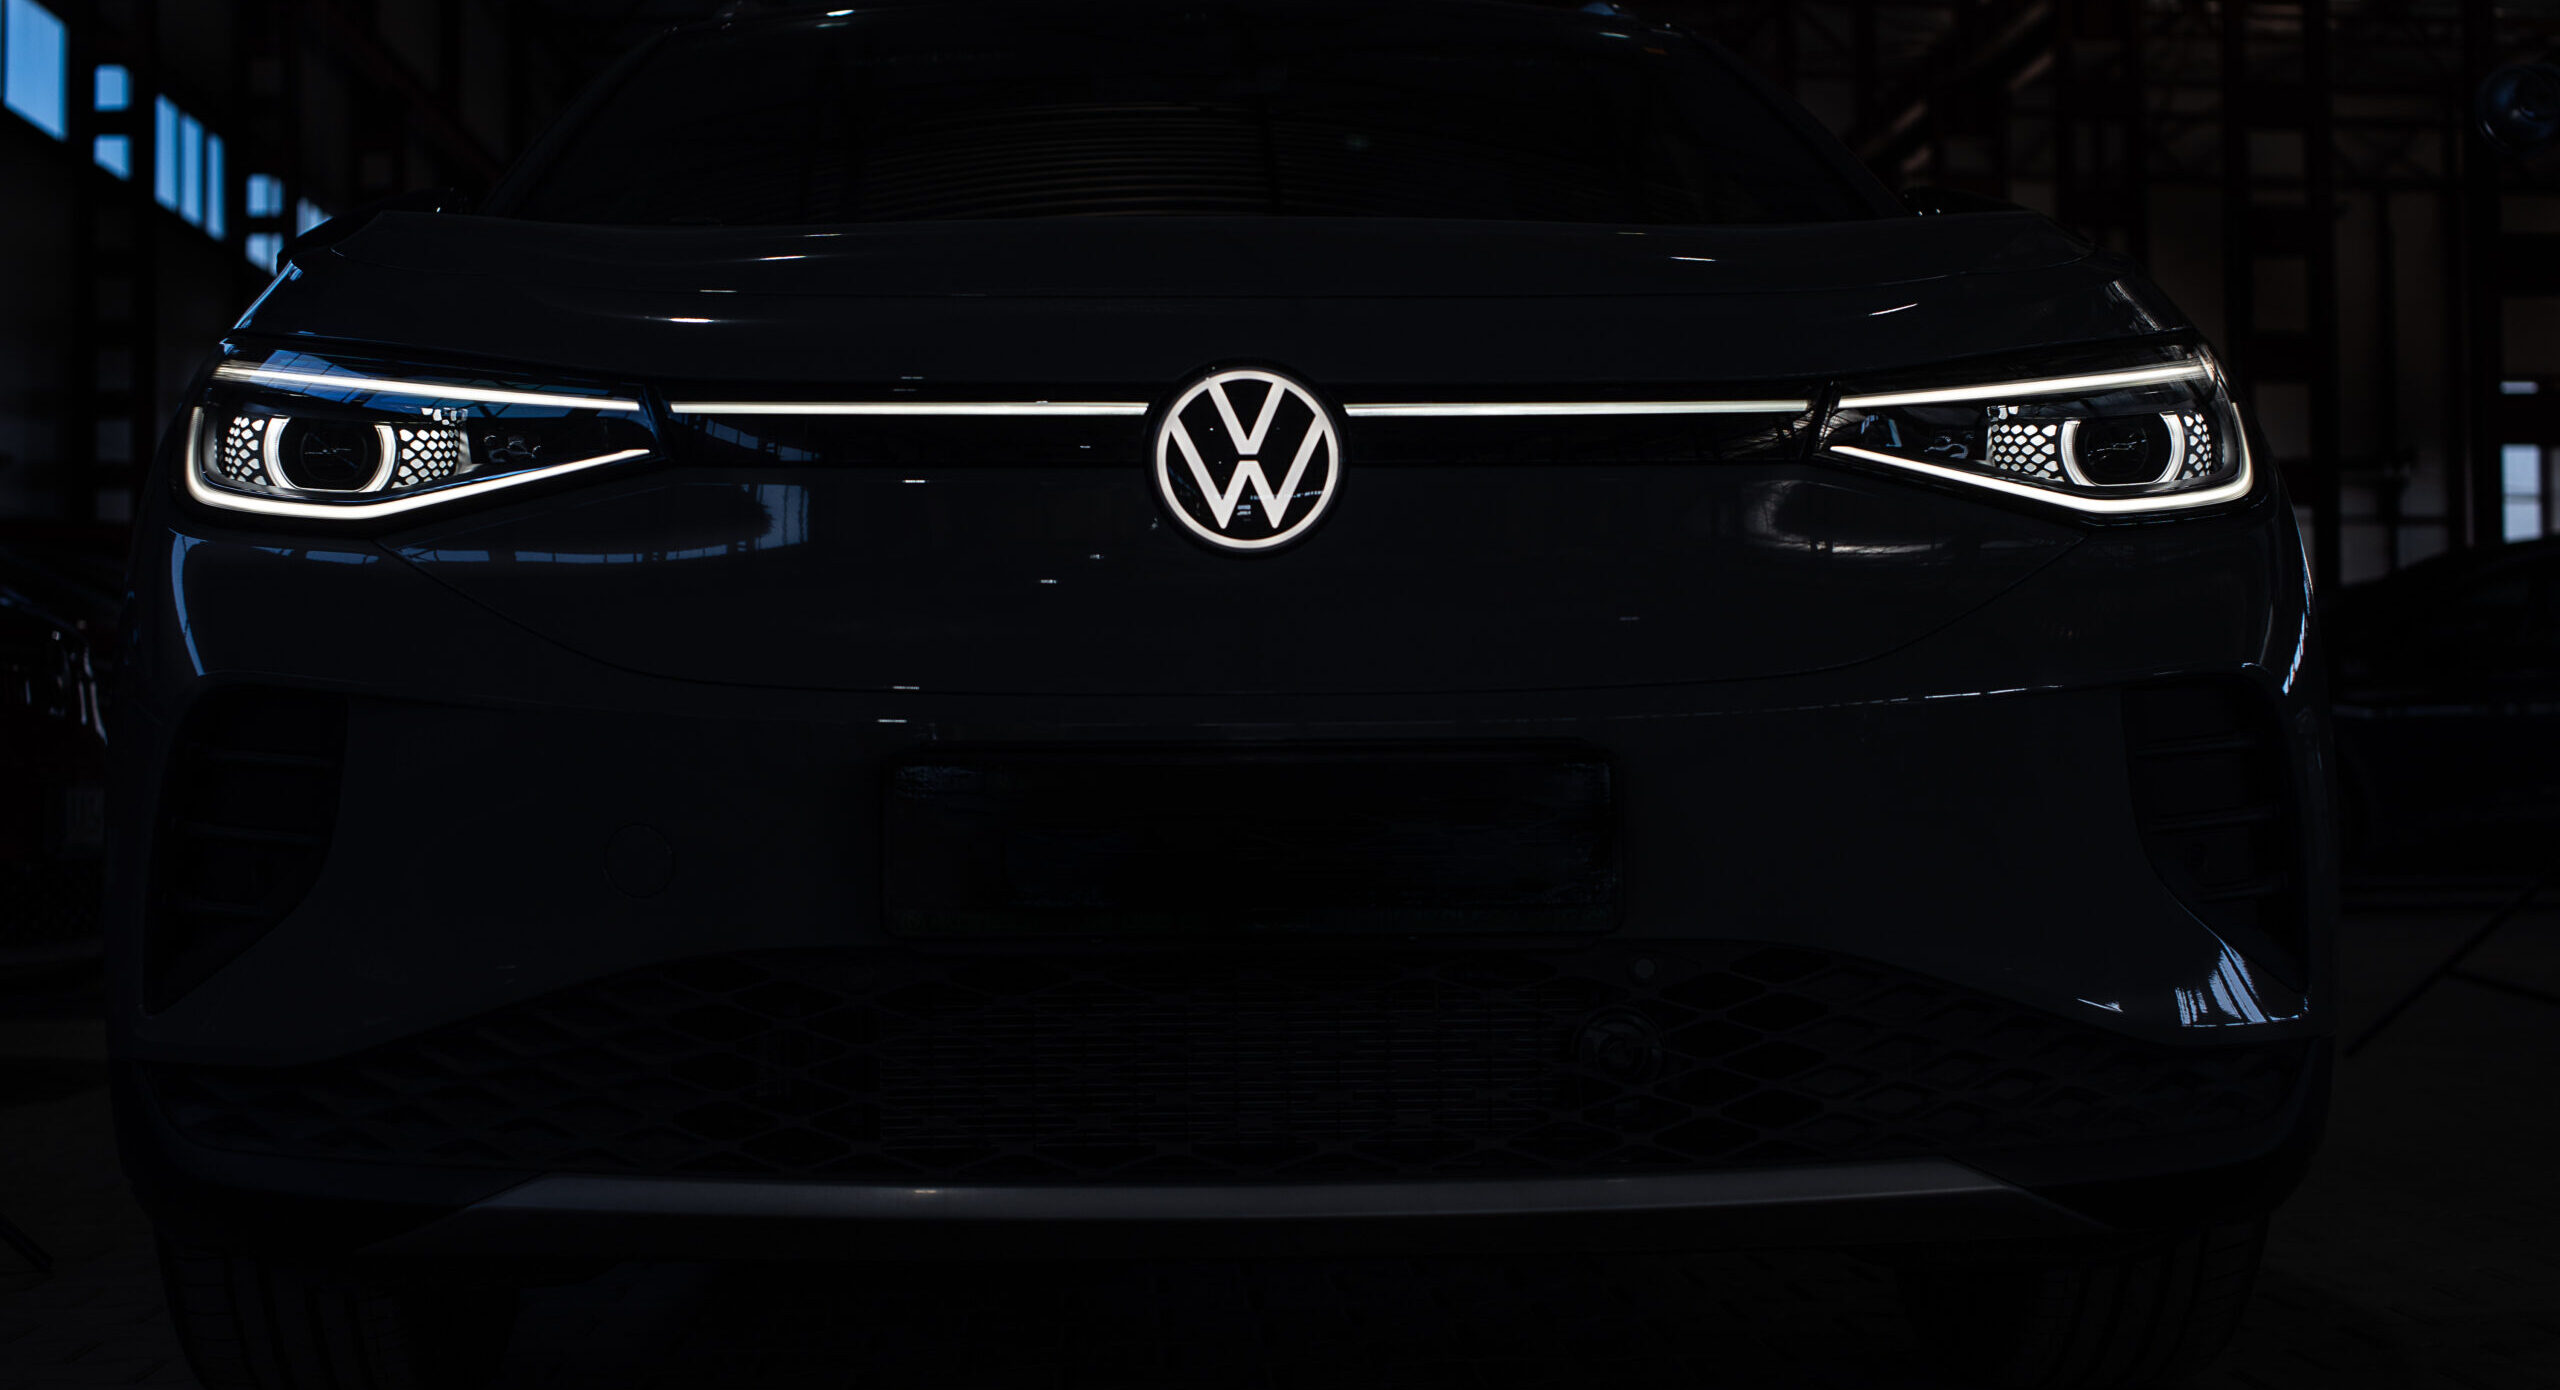 Volkswagen's production pause another sign of European EV troubles - Adamas  Intelligence